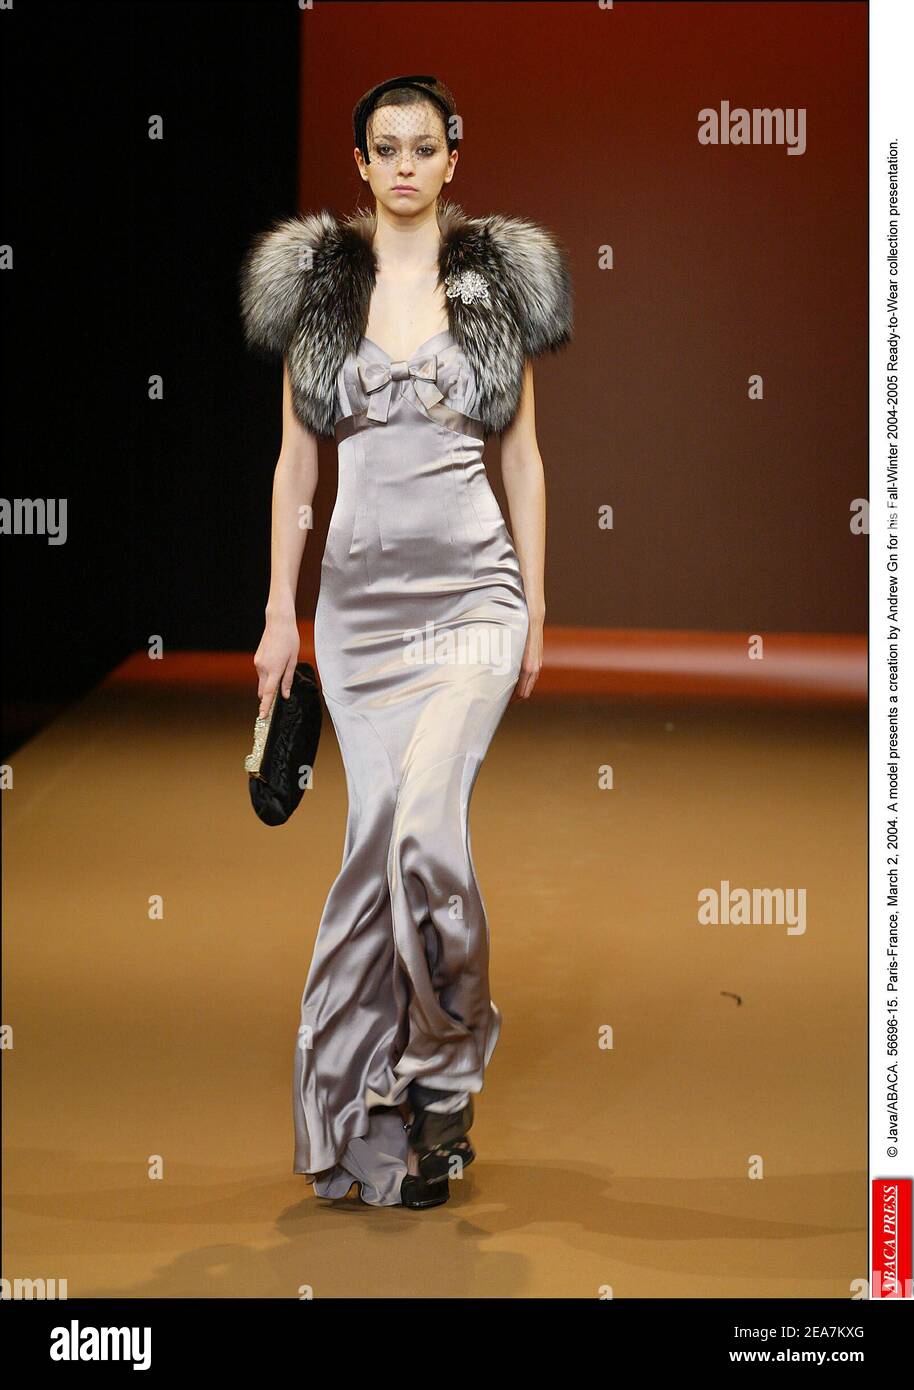 © Java/ABACA. 56696-15. Paris-France, March 2, 2004. A model presents a creation by Andrew Gn for his Fall-Winter 2004-2005 Ready-to-Wear collection presentation. Stock Photo